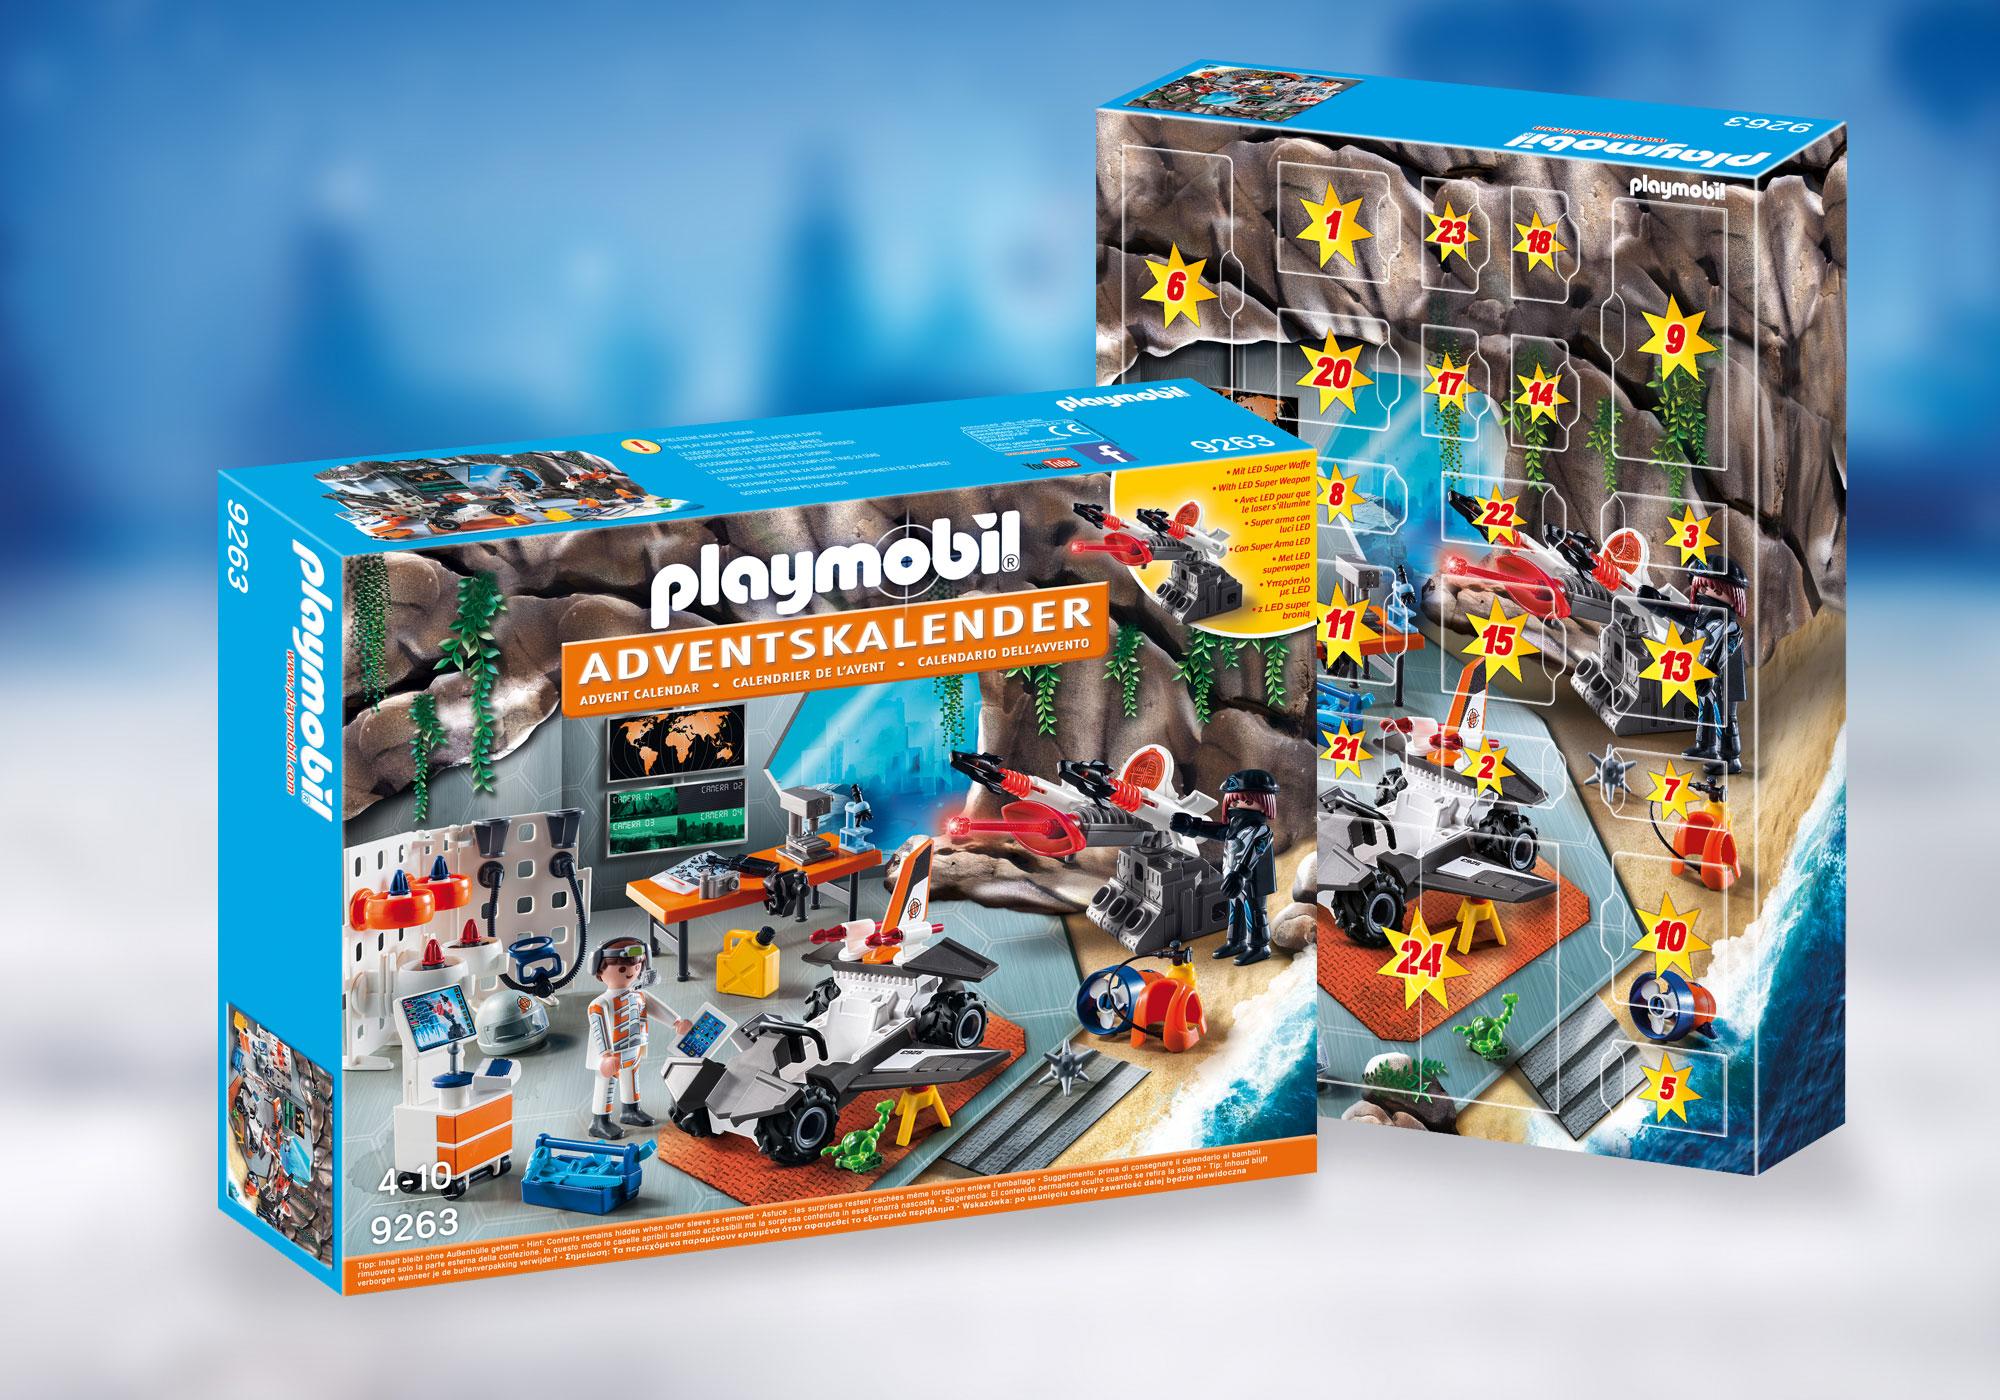 calendrier playmobil top agent